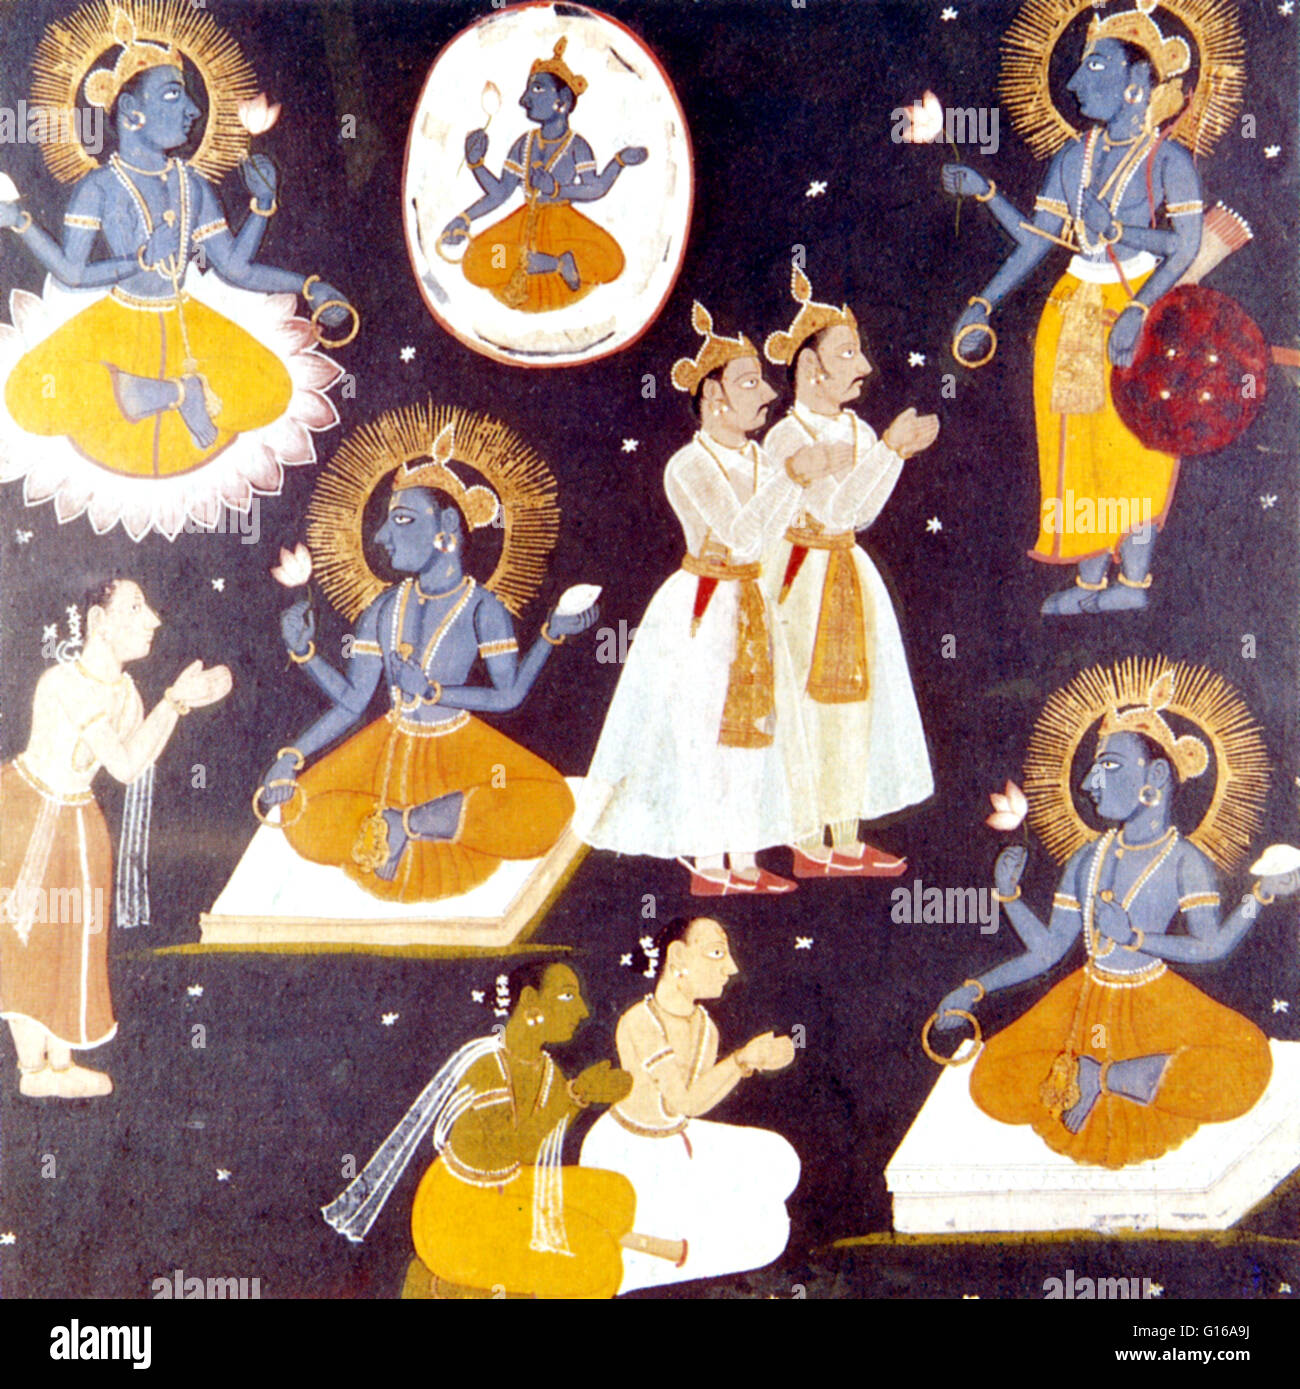 Vishnu worshipped in five manifestations from the Hindu text Vishnu Samabranahama. Vishnu is regarded as a major god in Hinduism and Indian mythology. He is thought as the preserver of the universe while two other major Hindu gods Brahma and Shiva, are re Stock Photo